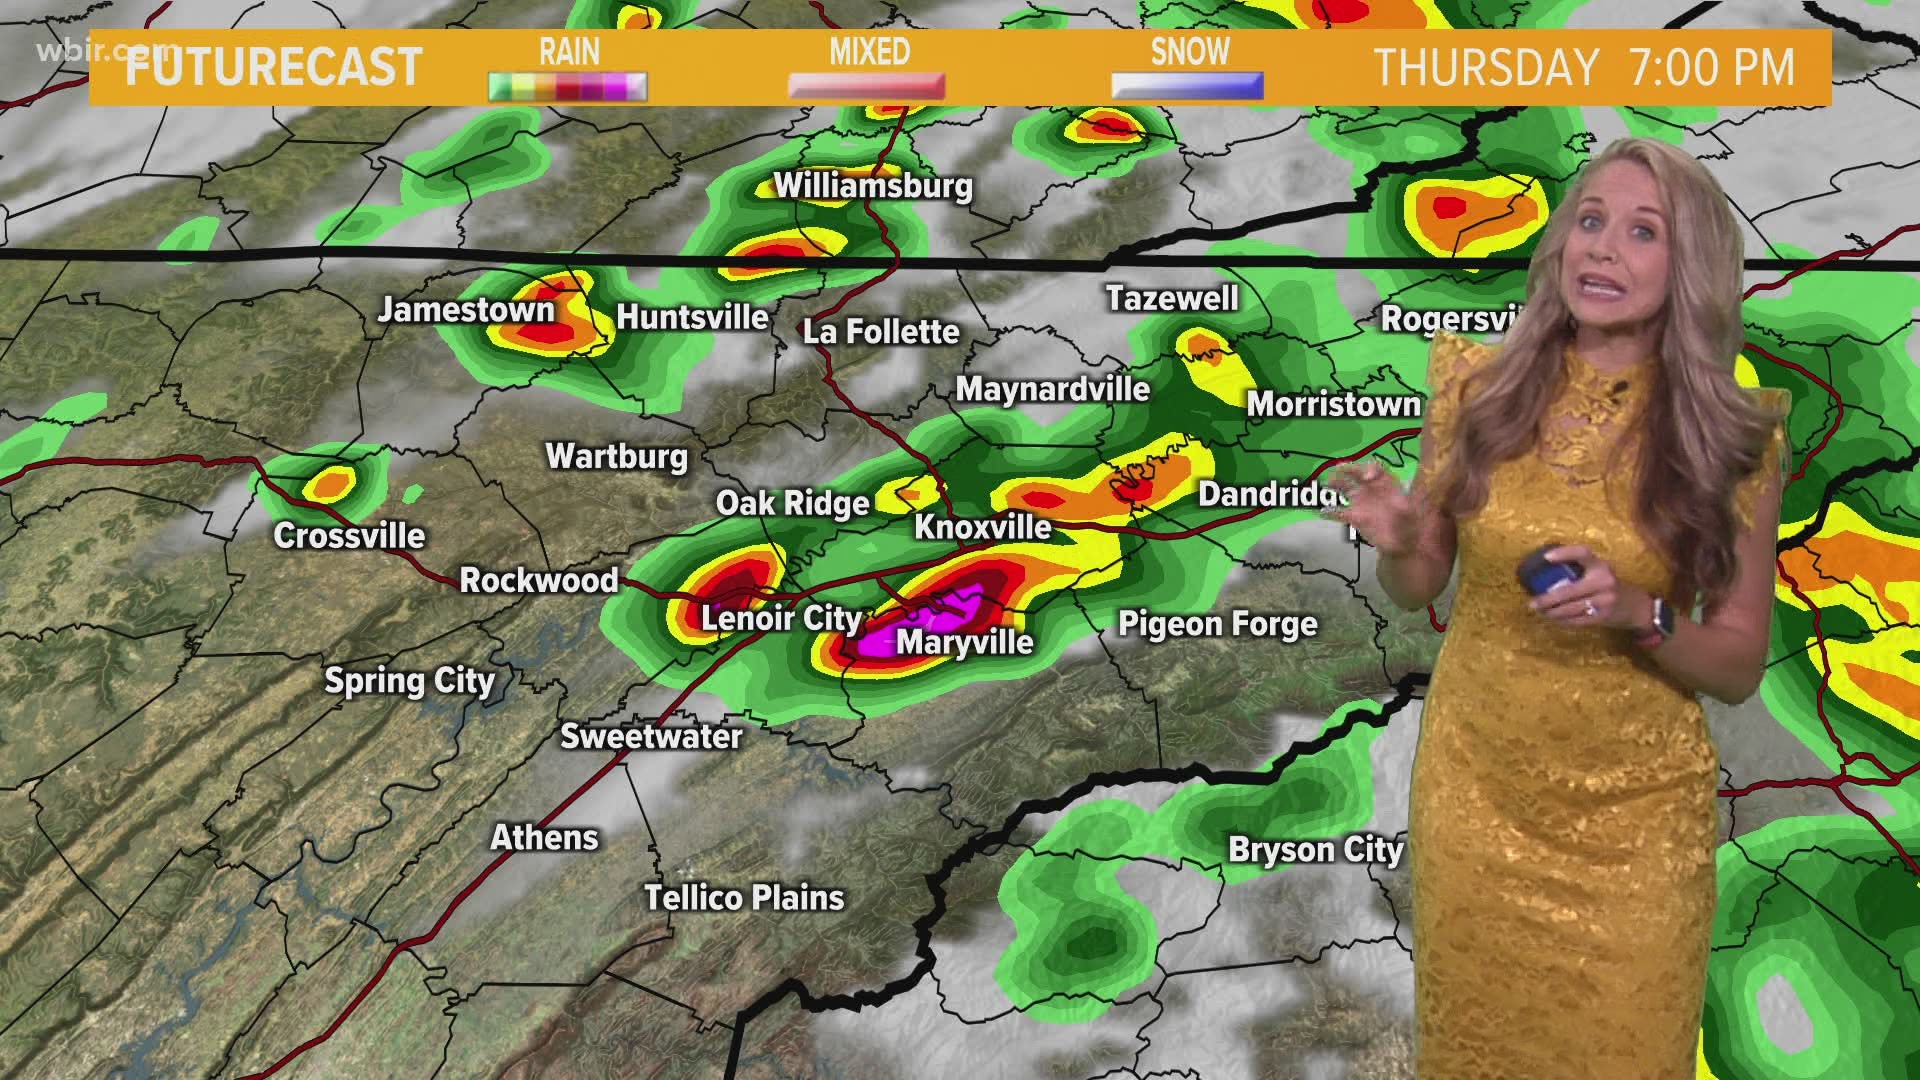 Afternoon Update: showers and thunderstorms possible